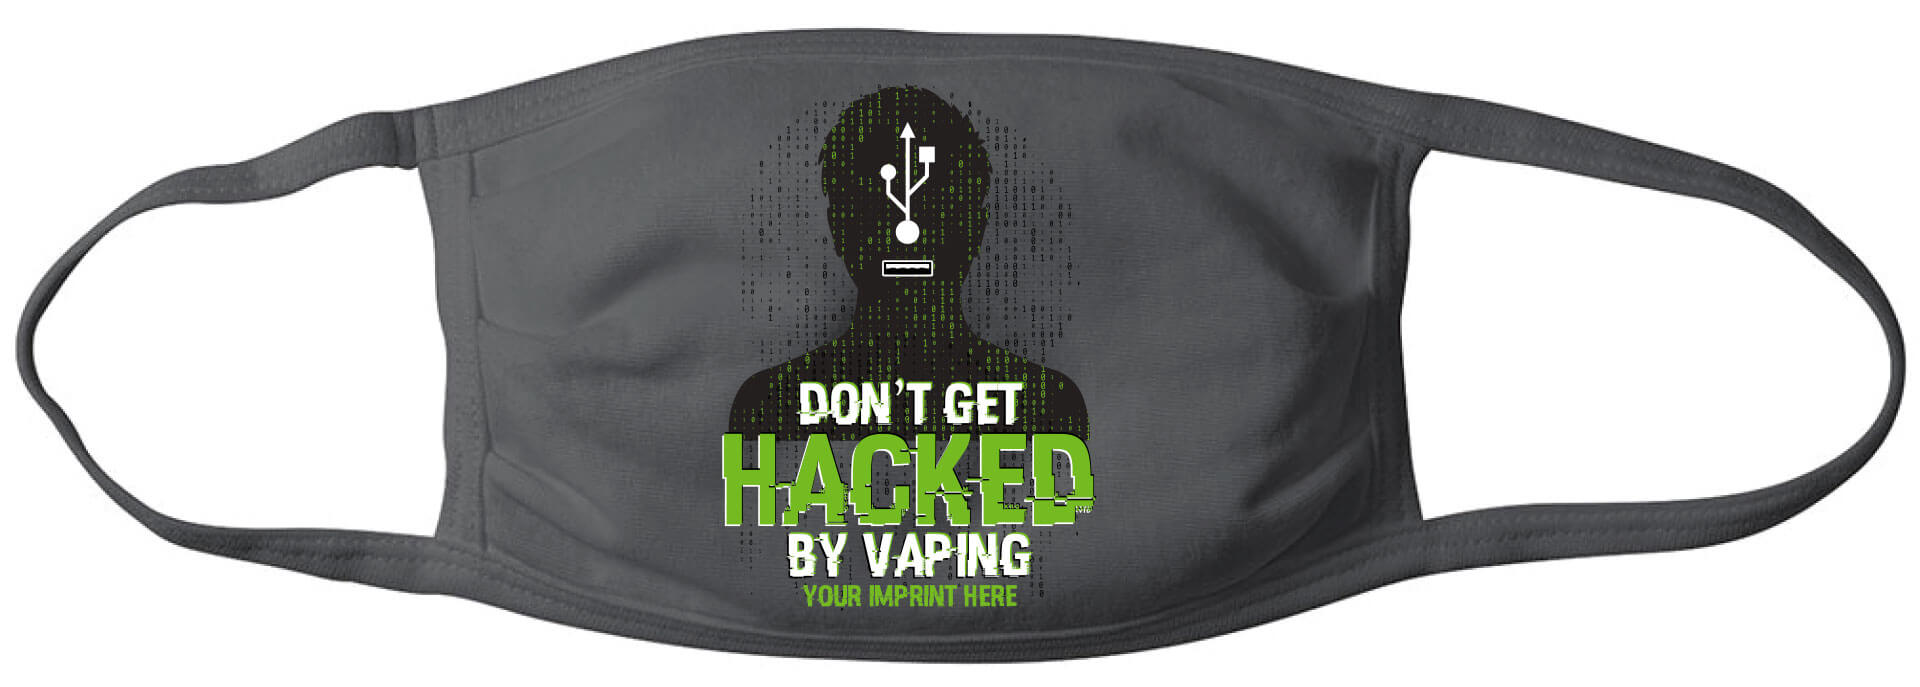 Don't Get Hacked Mask with a tobacco and vaping prevention design